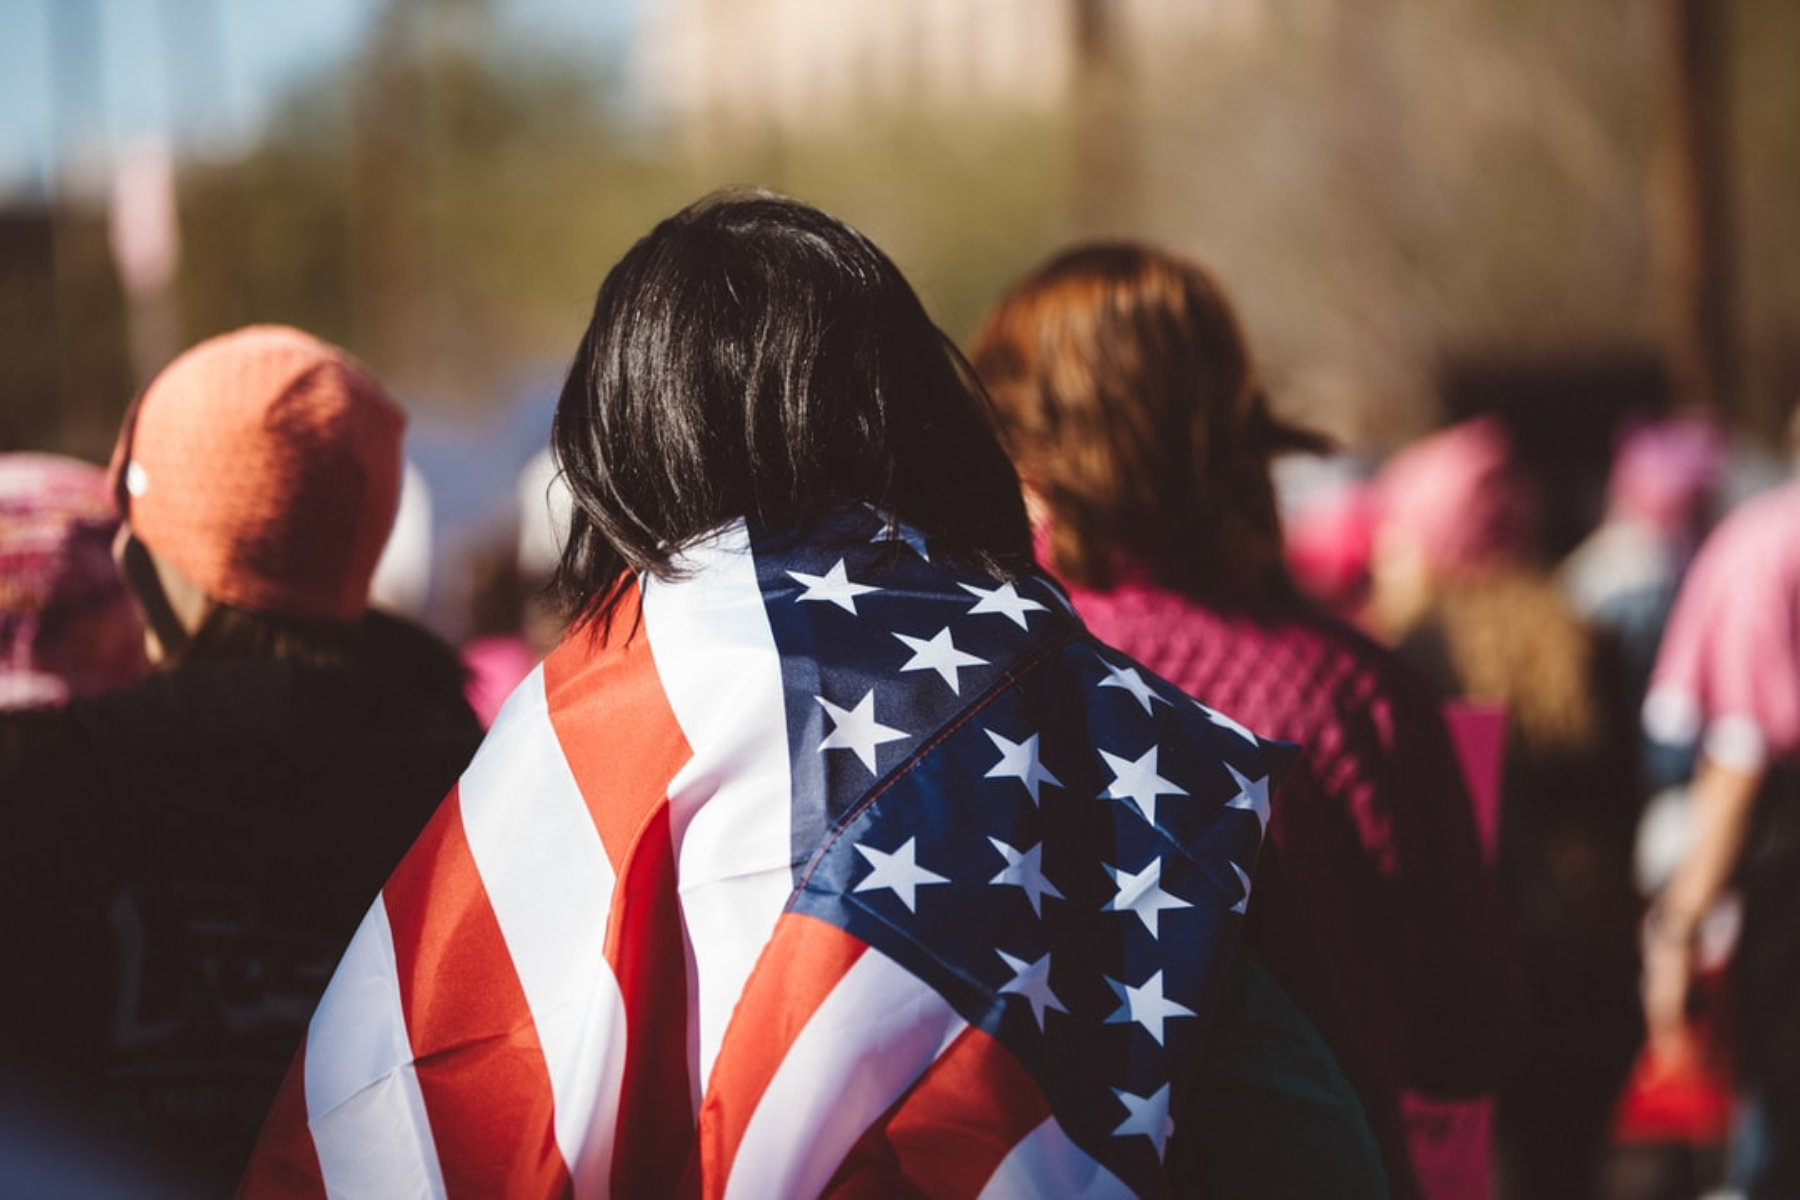 An American flag draped over a person